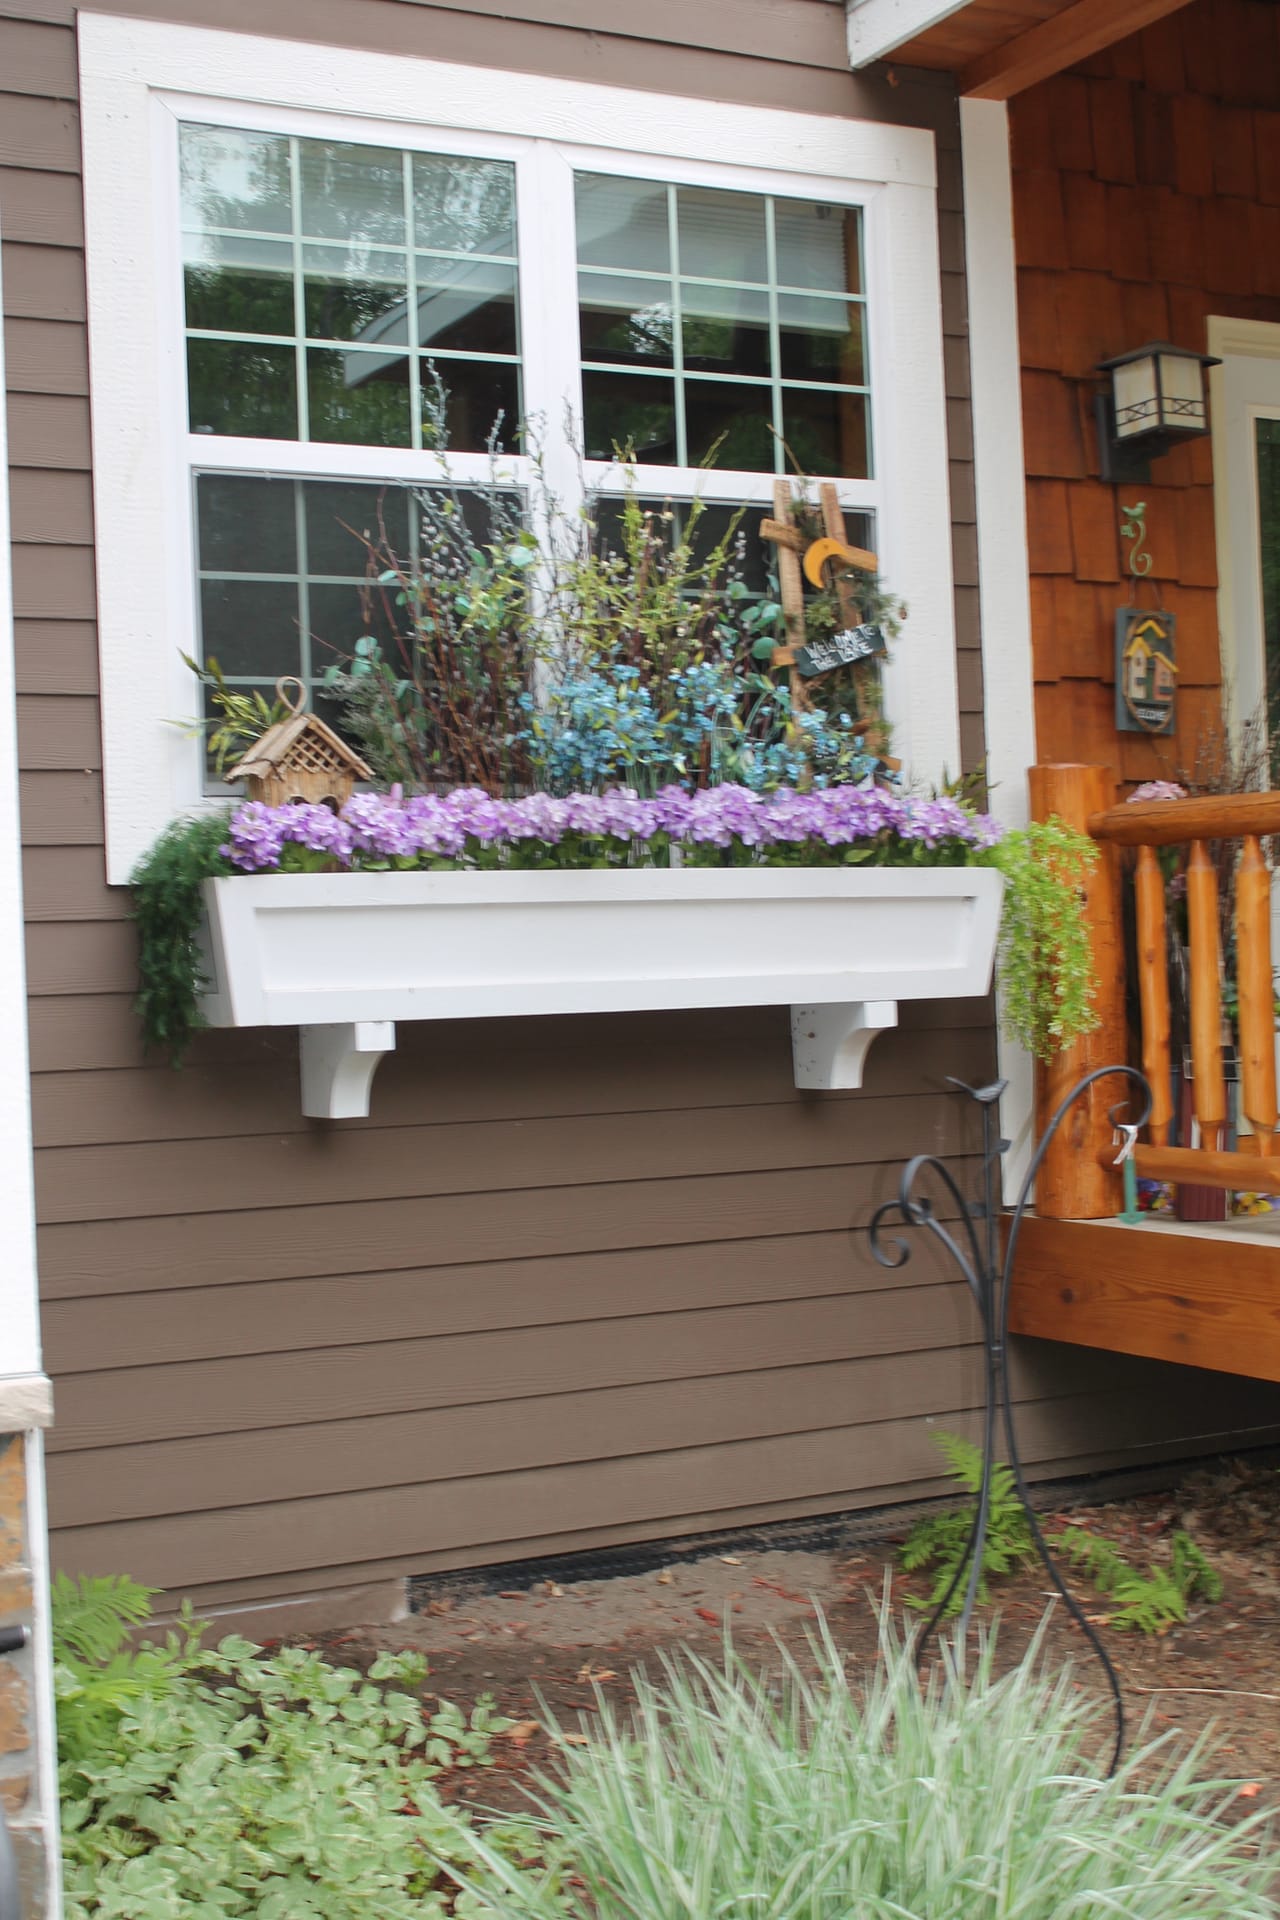 Remodelaholic | How to Build a Window Box Planter in 5 Steps